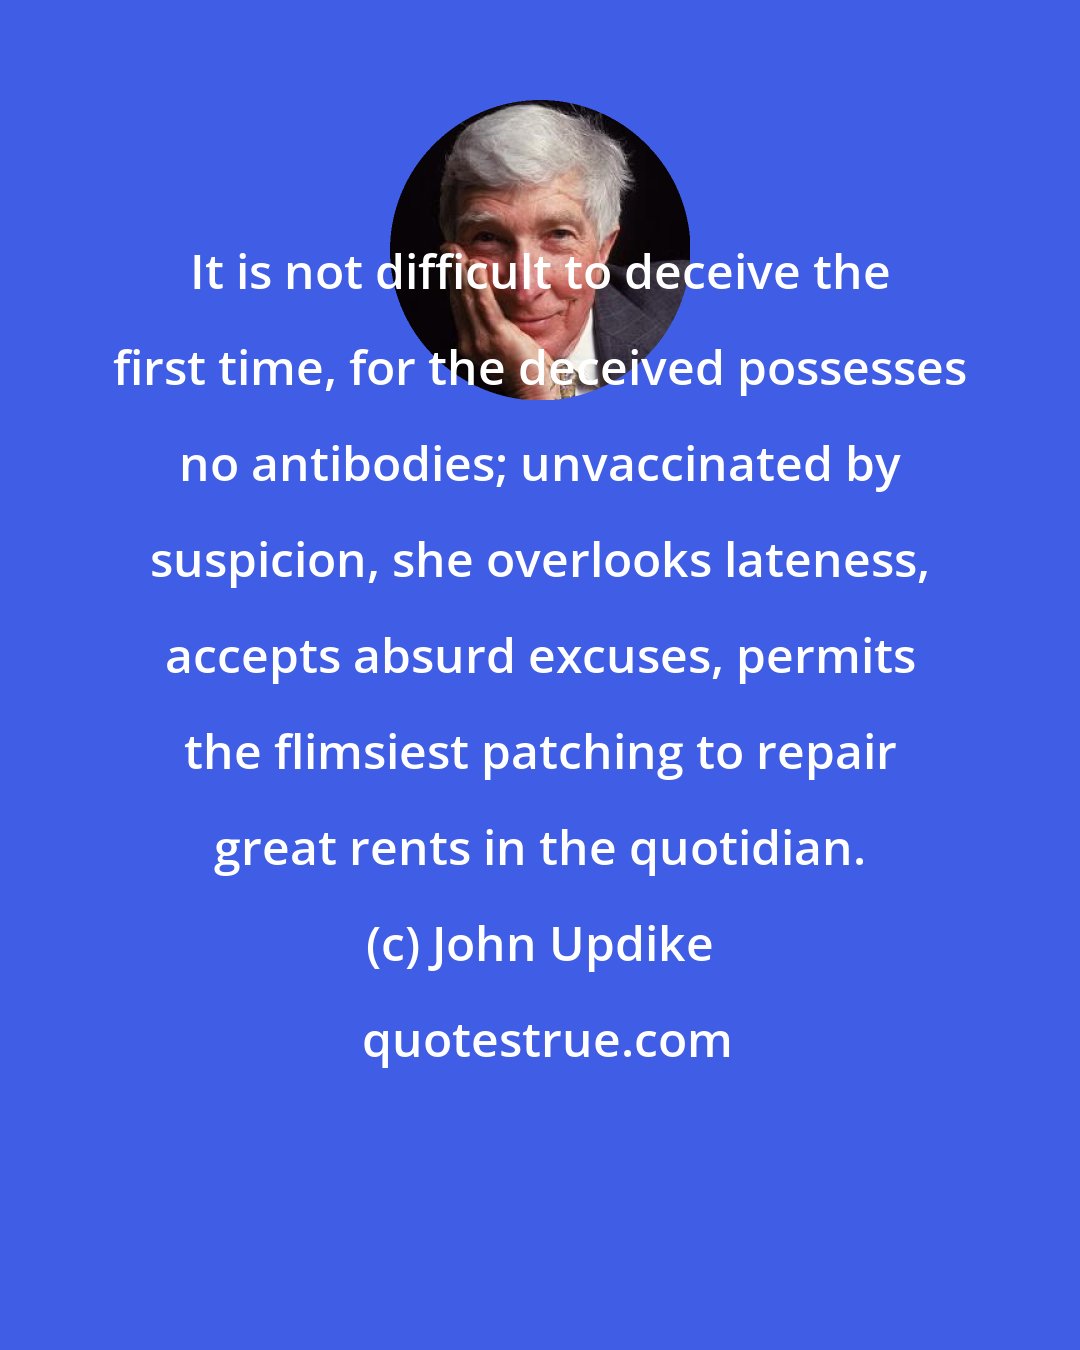 John Updike: It is not difficult to deceive the first time, for the deceived possesses no antibodies; unvaccinated by suspicion, she overlooks lateness, accepts absurd excuses, permits the flimsiest patching to repair great rents in the quotidian.